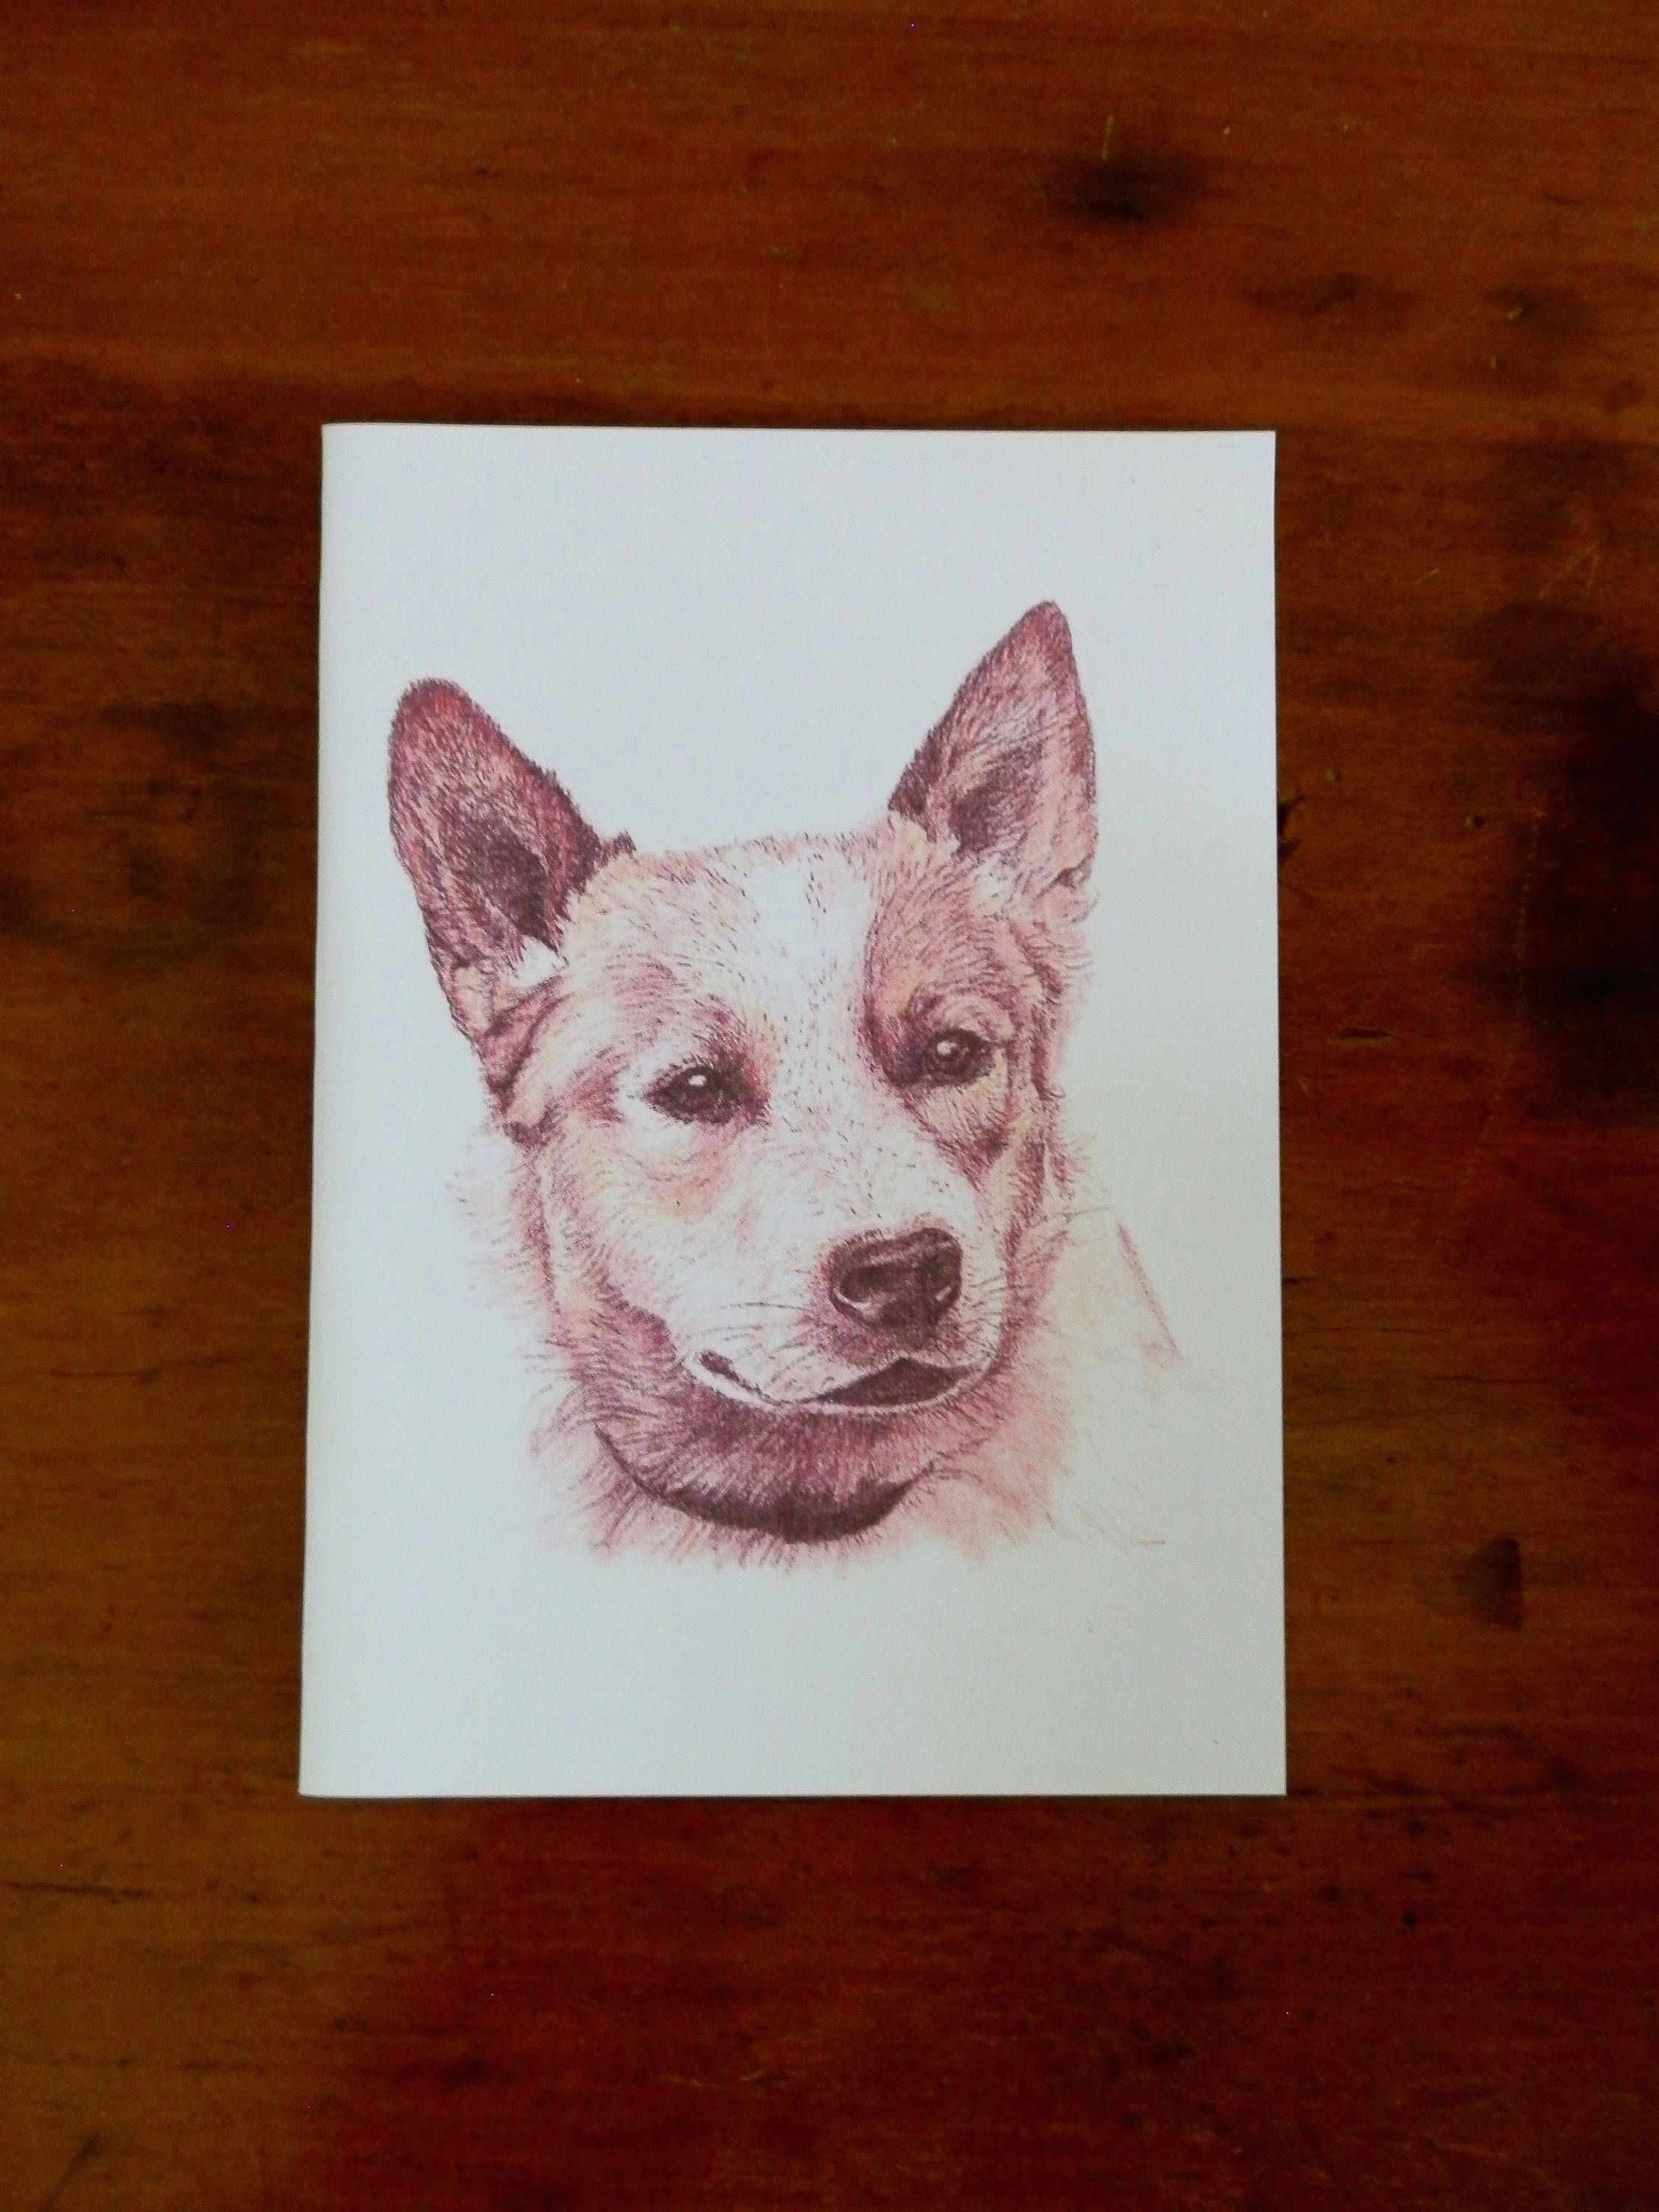 cattle dog red australian card greeting blank drawing illustration color pencils doglovers by pattihendersonart on etsy